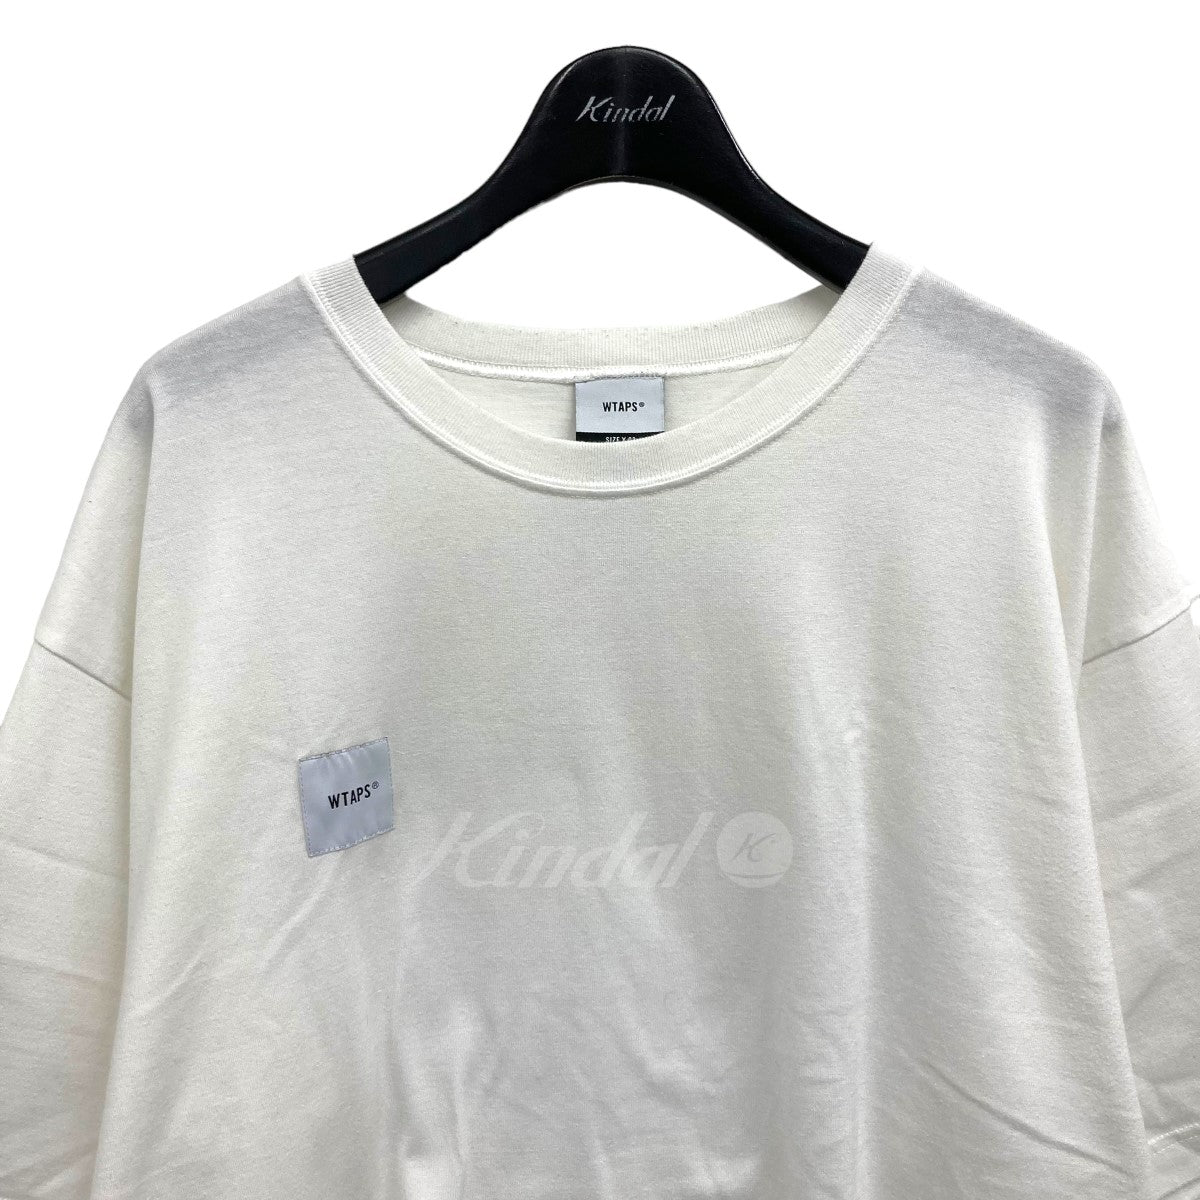 「HOME BASE SS 01」Tシャツ